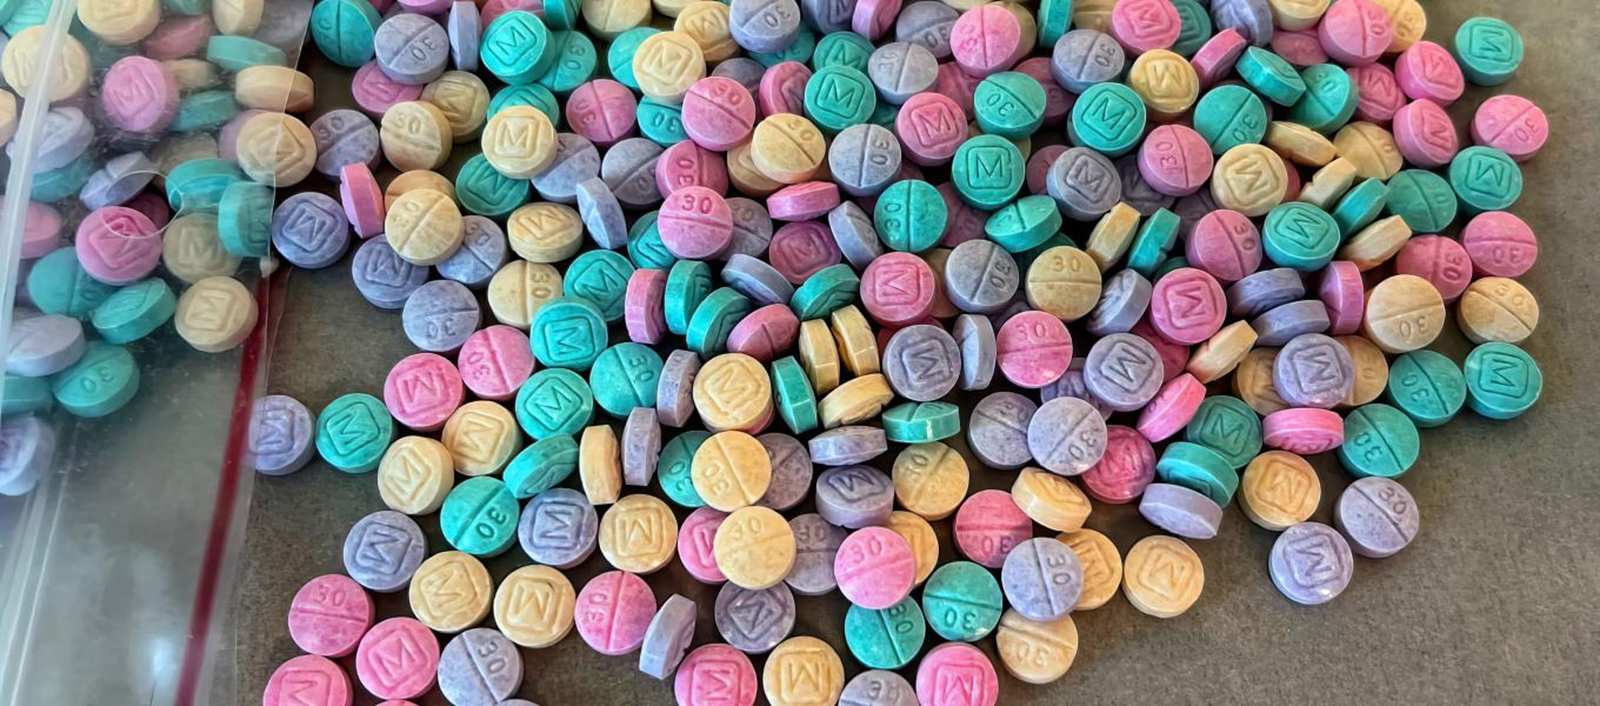 Parents warned of killer fake pills laced with fentanyl